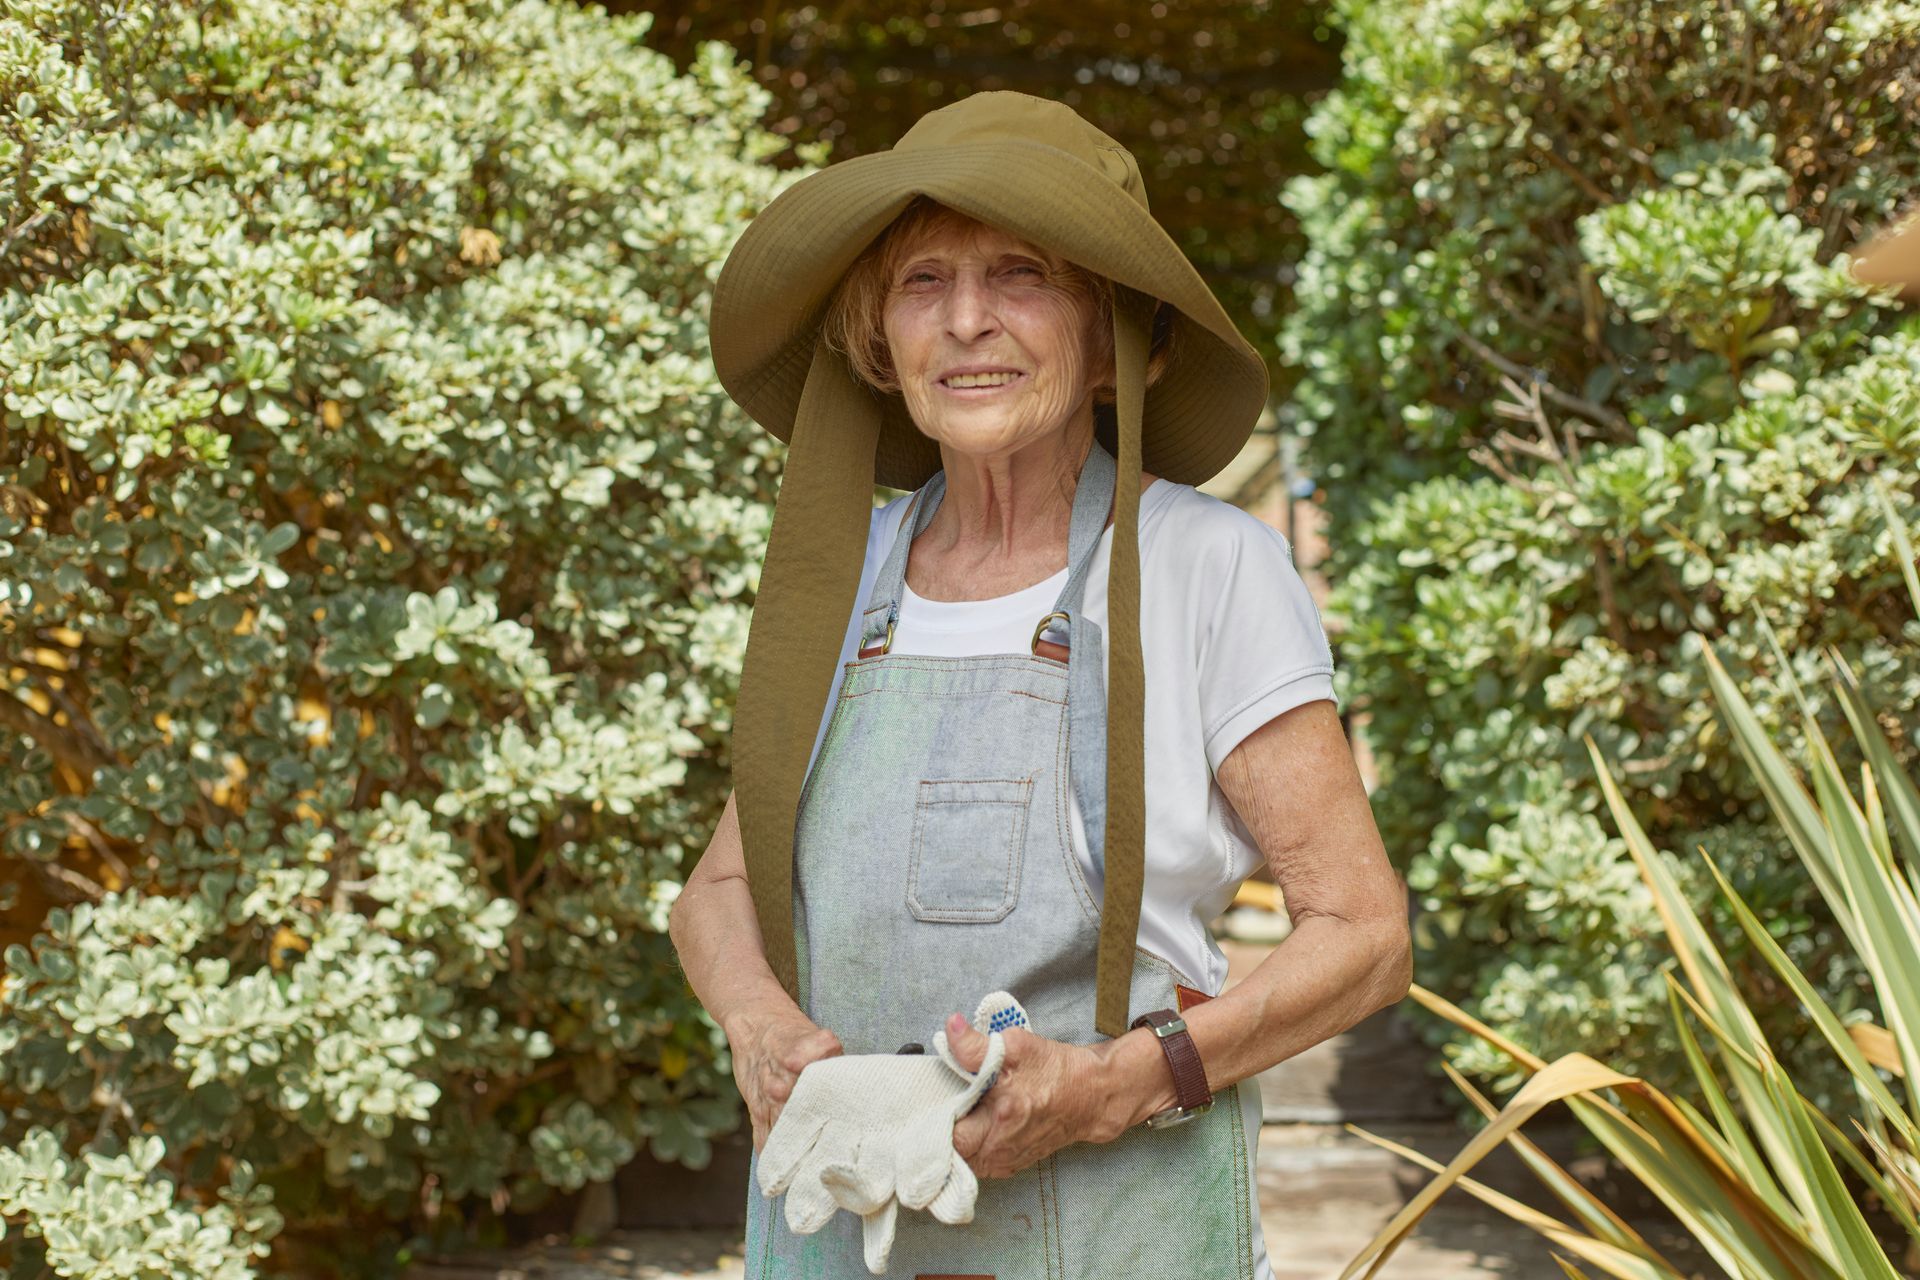 an elderly woman wearing a hat and apron is standing in a garden .